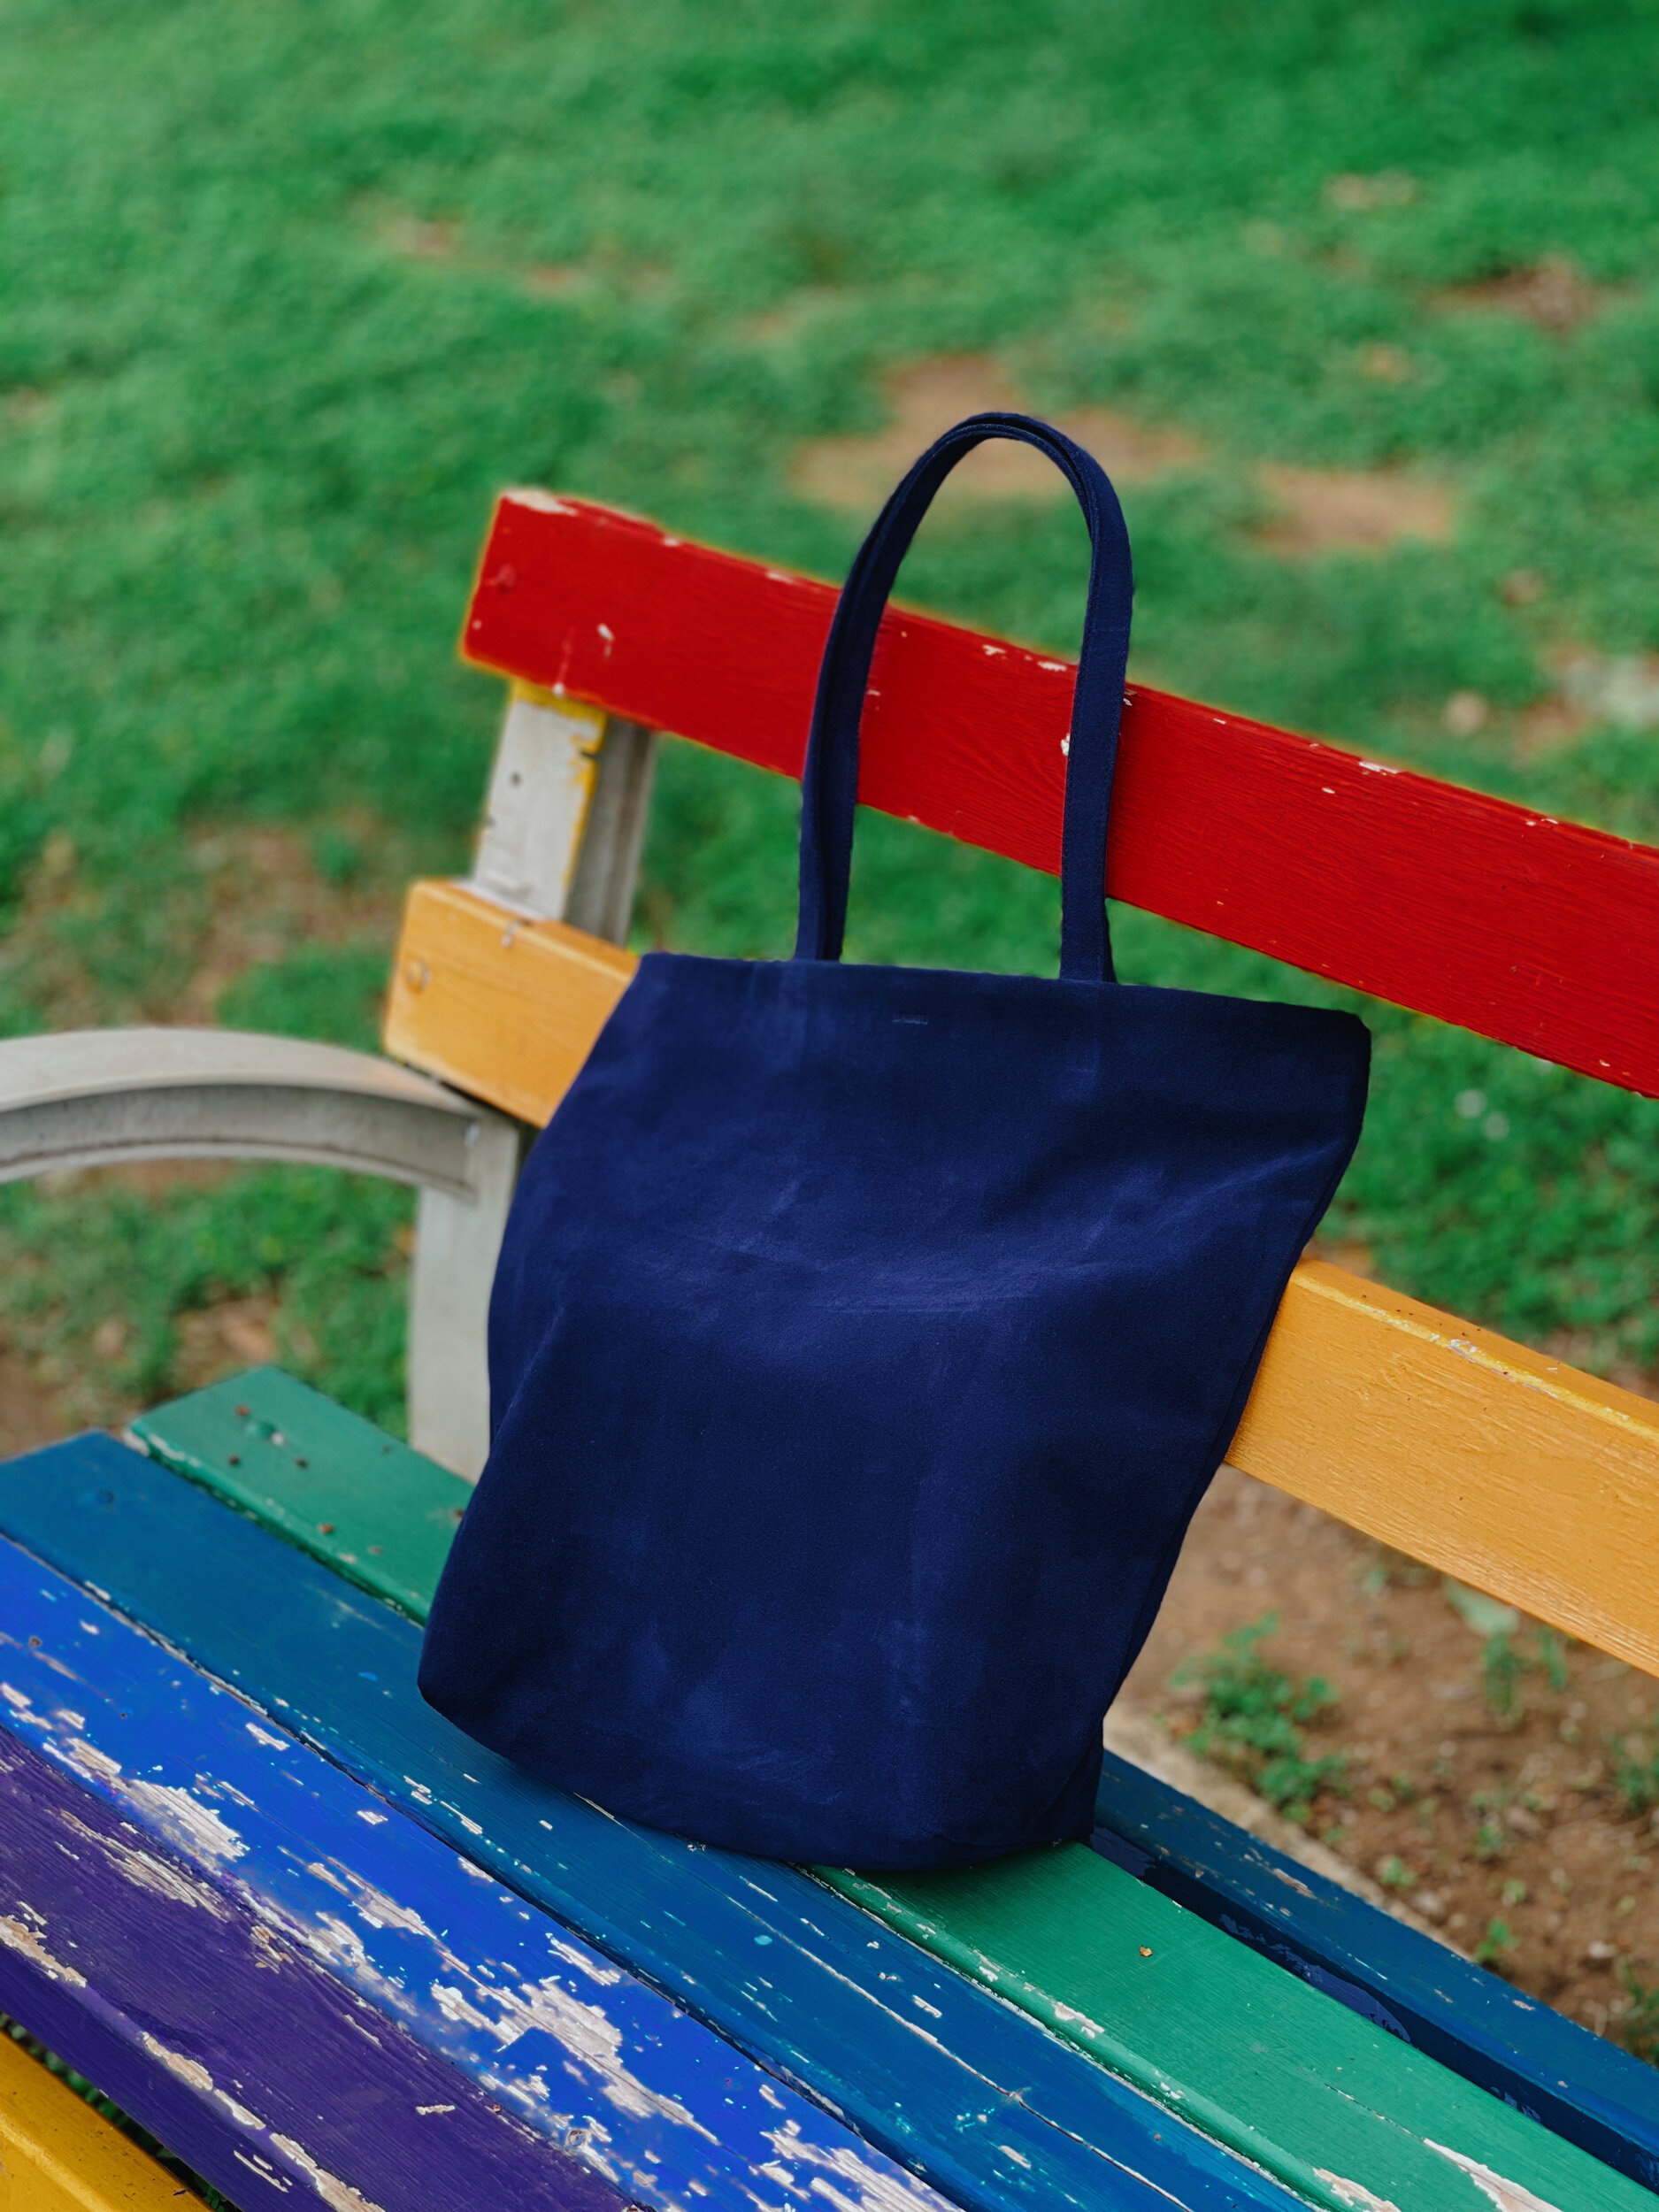 First impression on Baggu suede leather basic tote